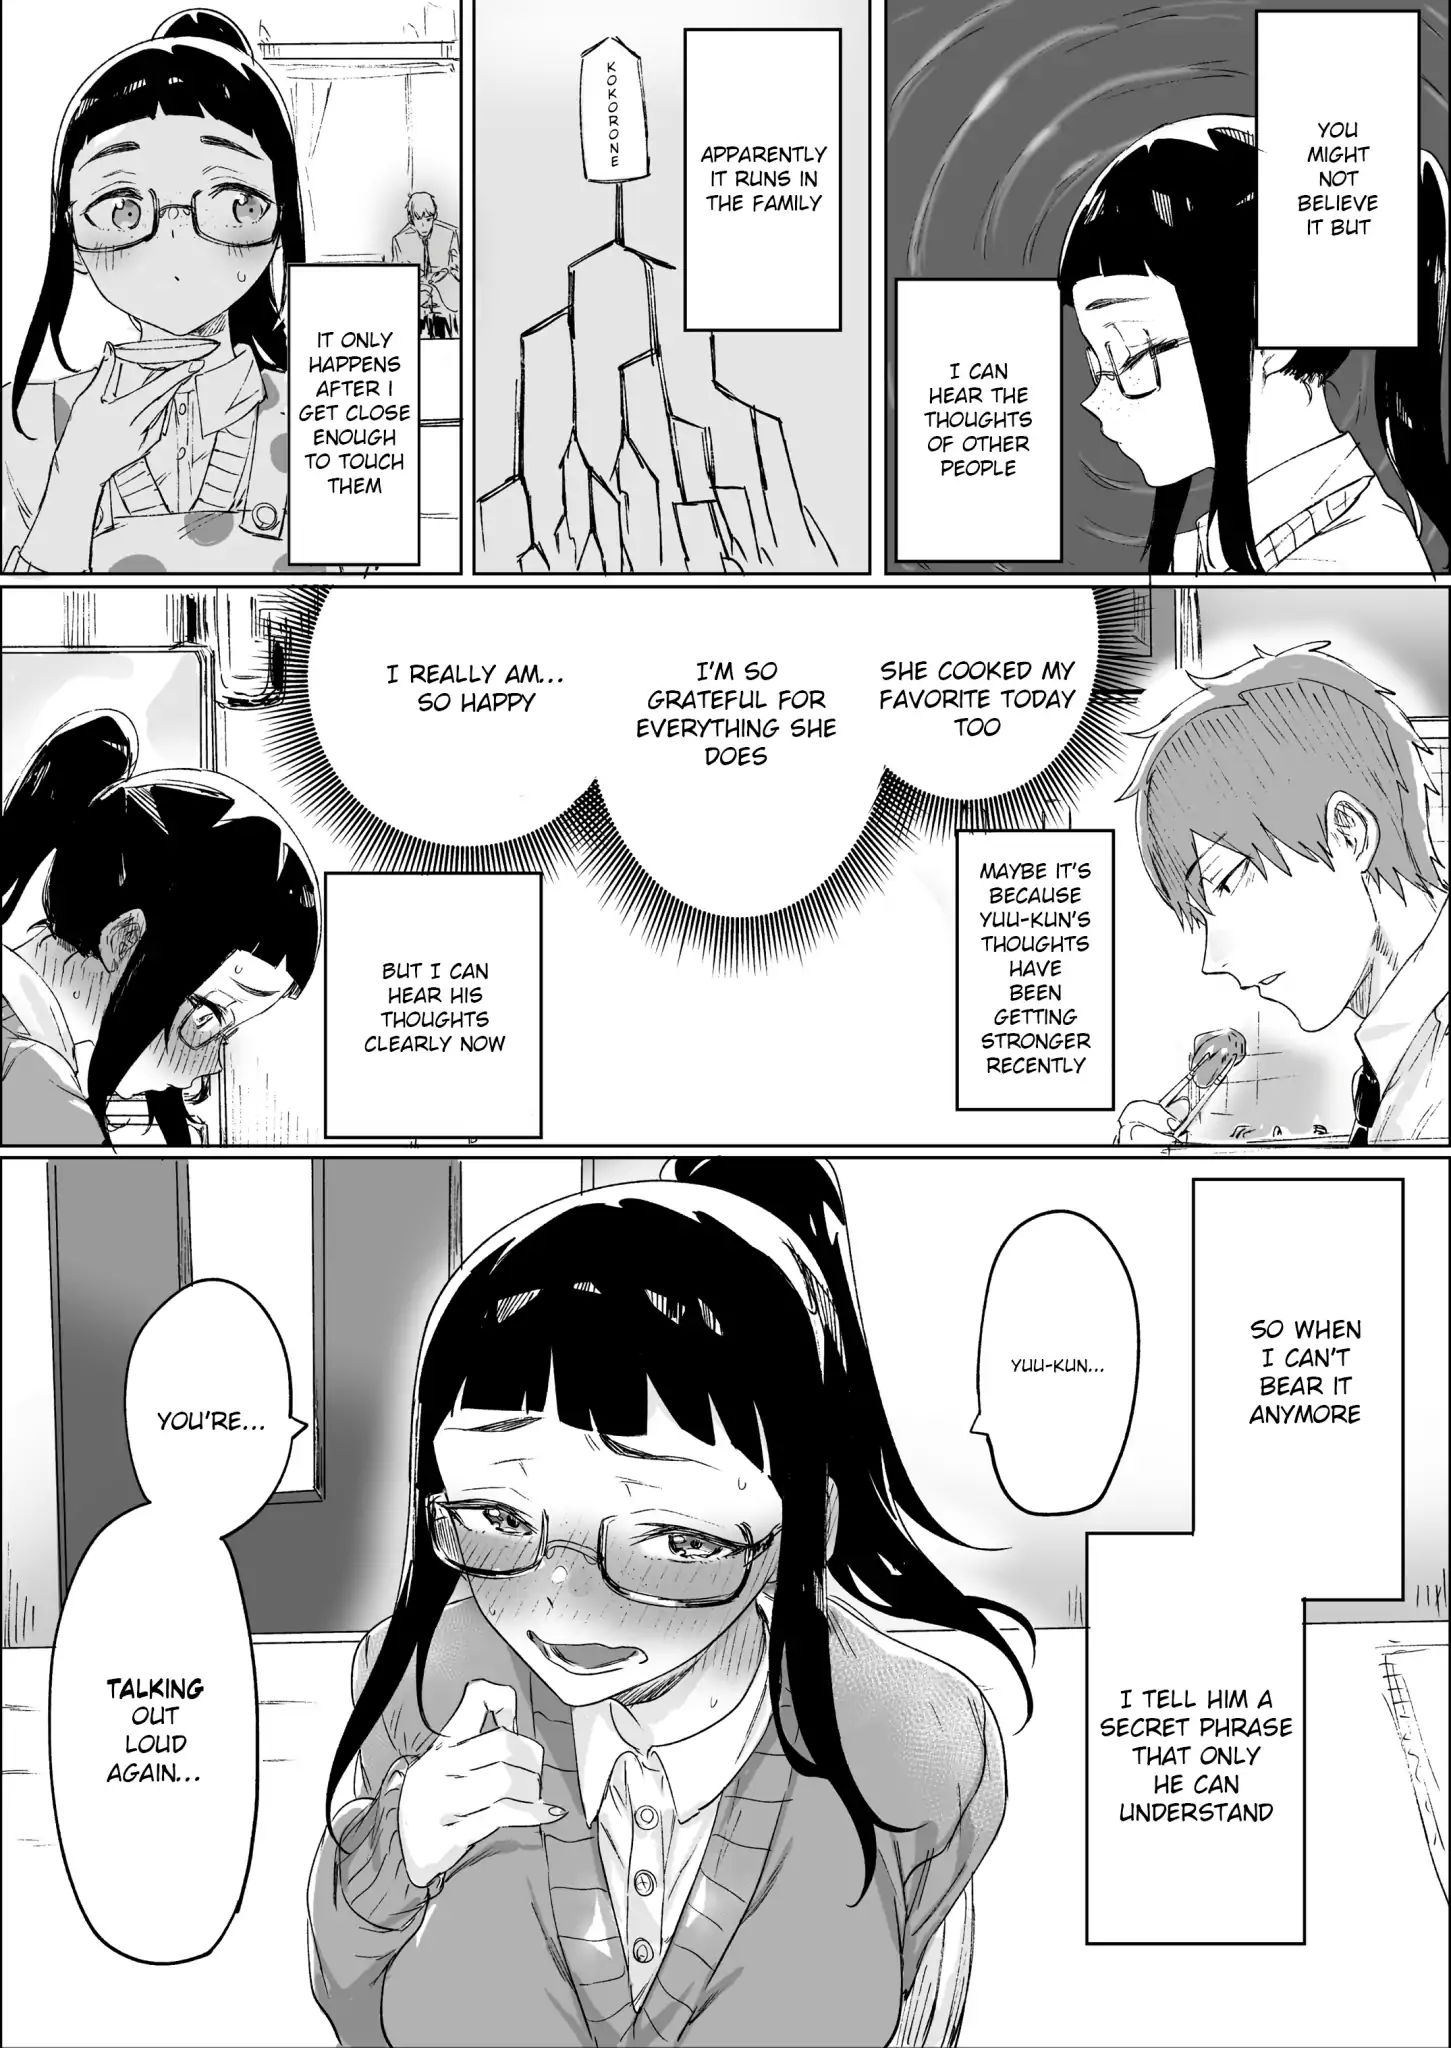 Confessing To My Childhood Friend Who’S Worried She’S Plain Vol.1 Chapter 3 - Picture 3